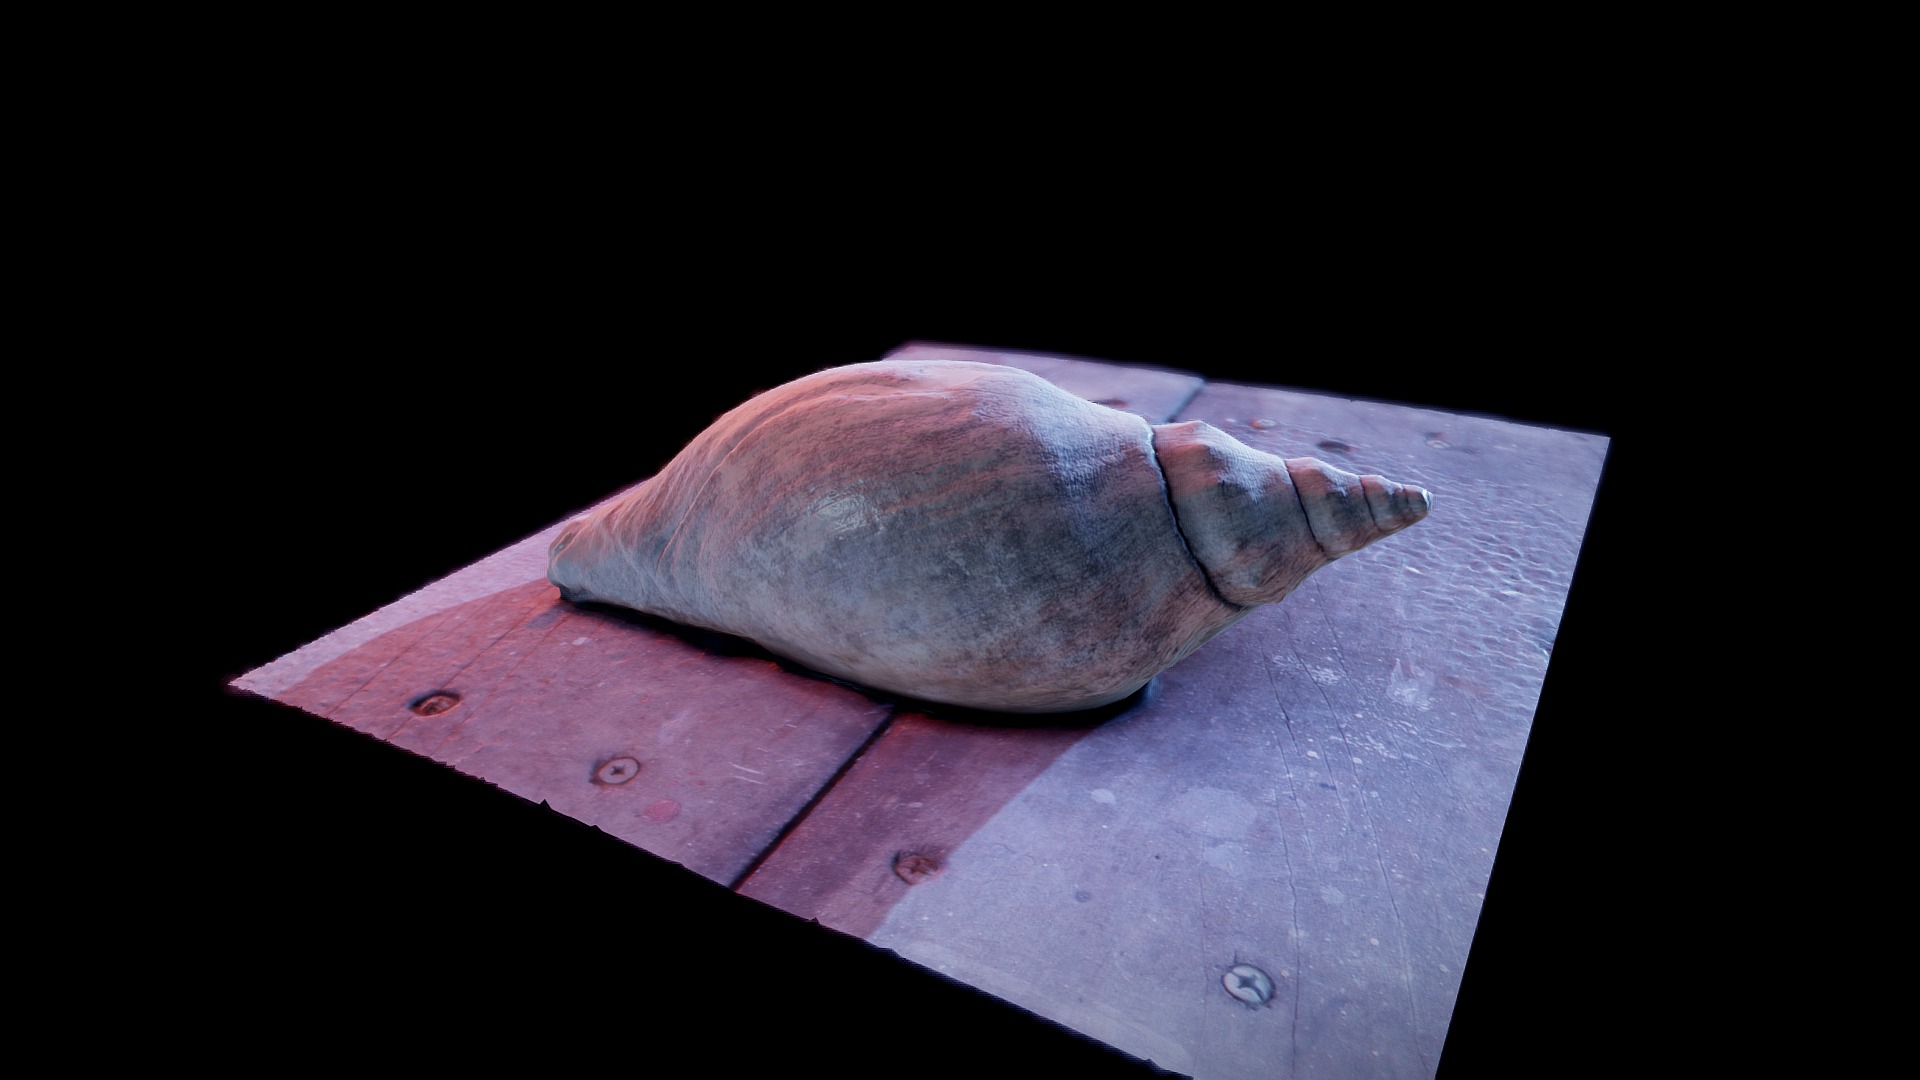 3D model Shell – Unprocessed 3D Scan - This is a 3D model of the Shell - Unprocessed 3D Scan. The 3D model is about a fish on a wooden surface.